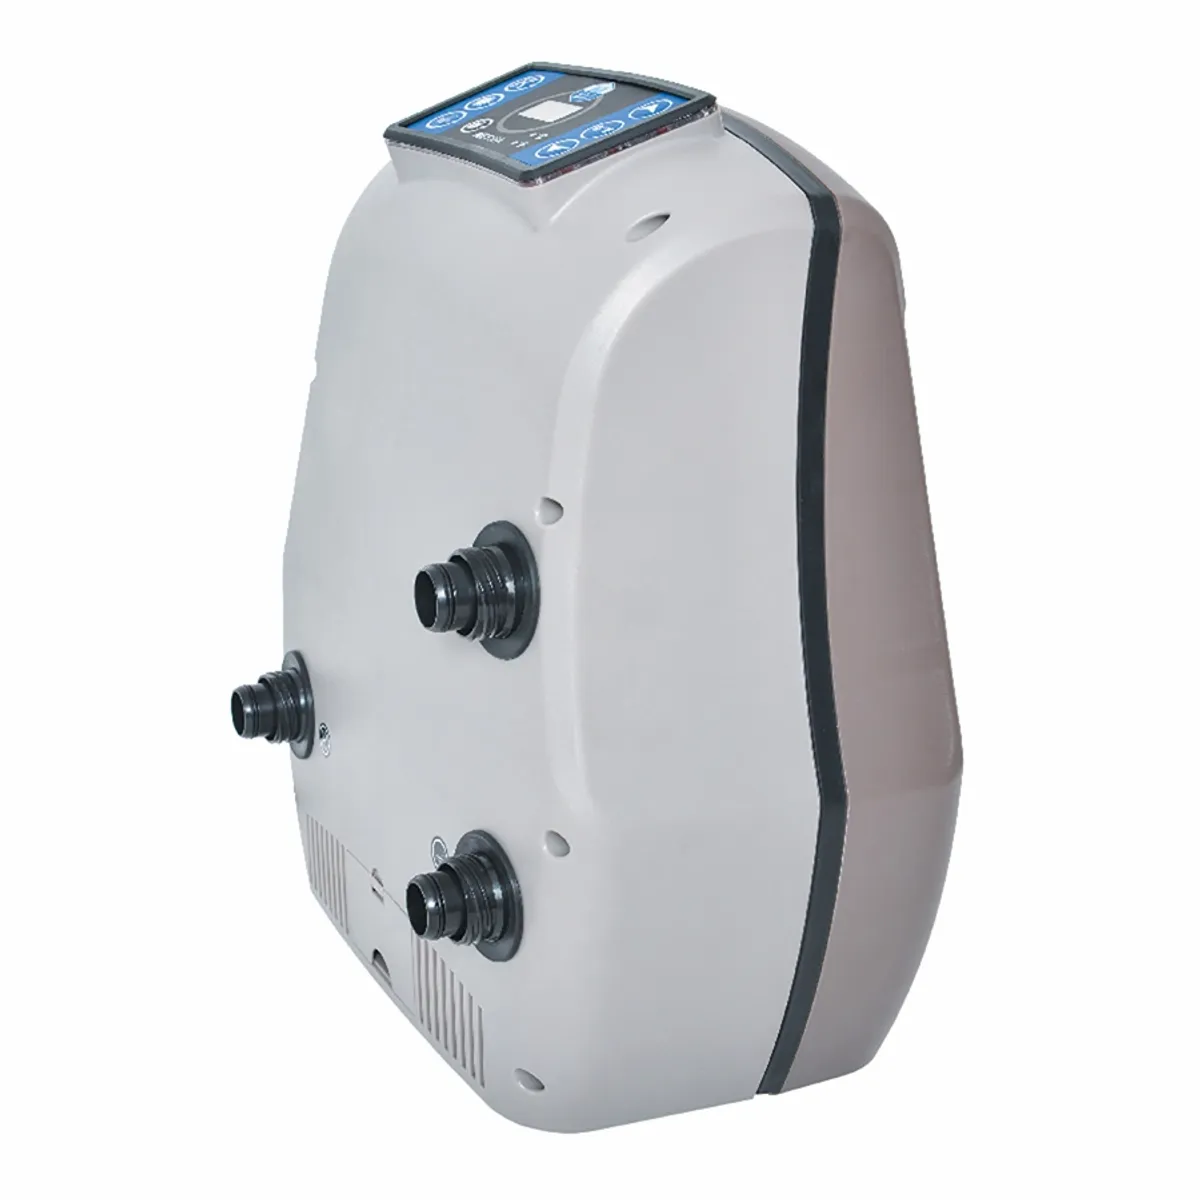 NetSpa Cairo spa gonflable - 4 personnes